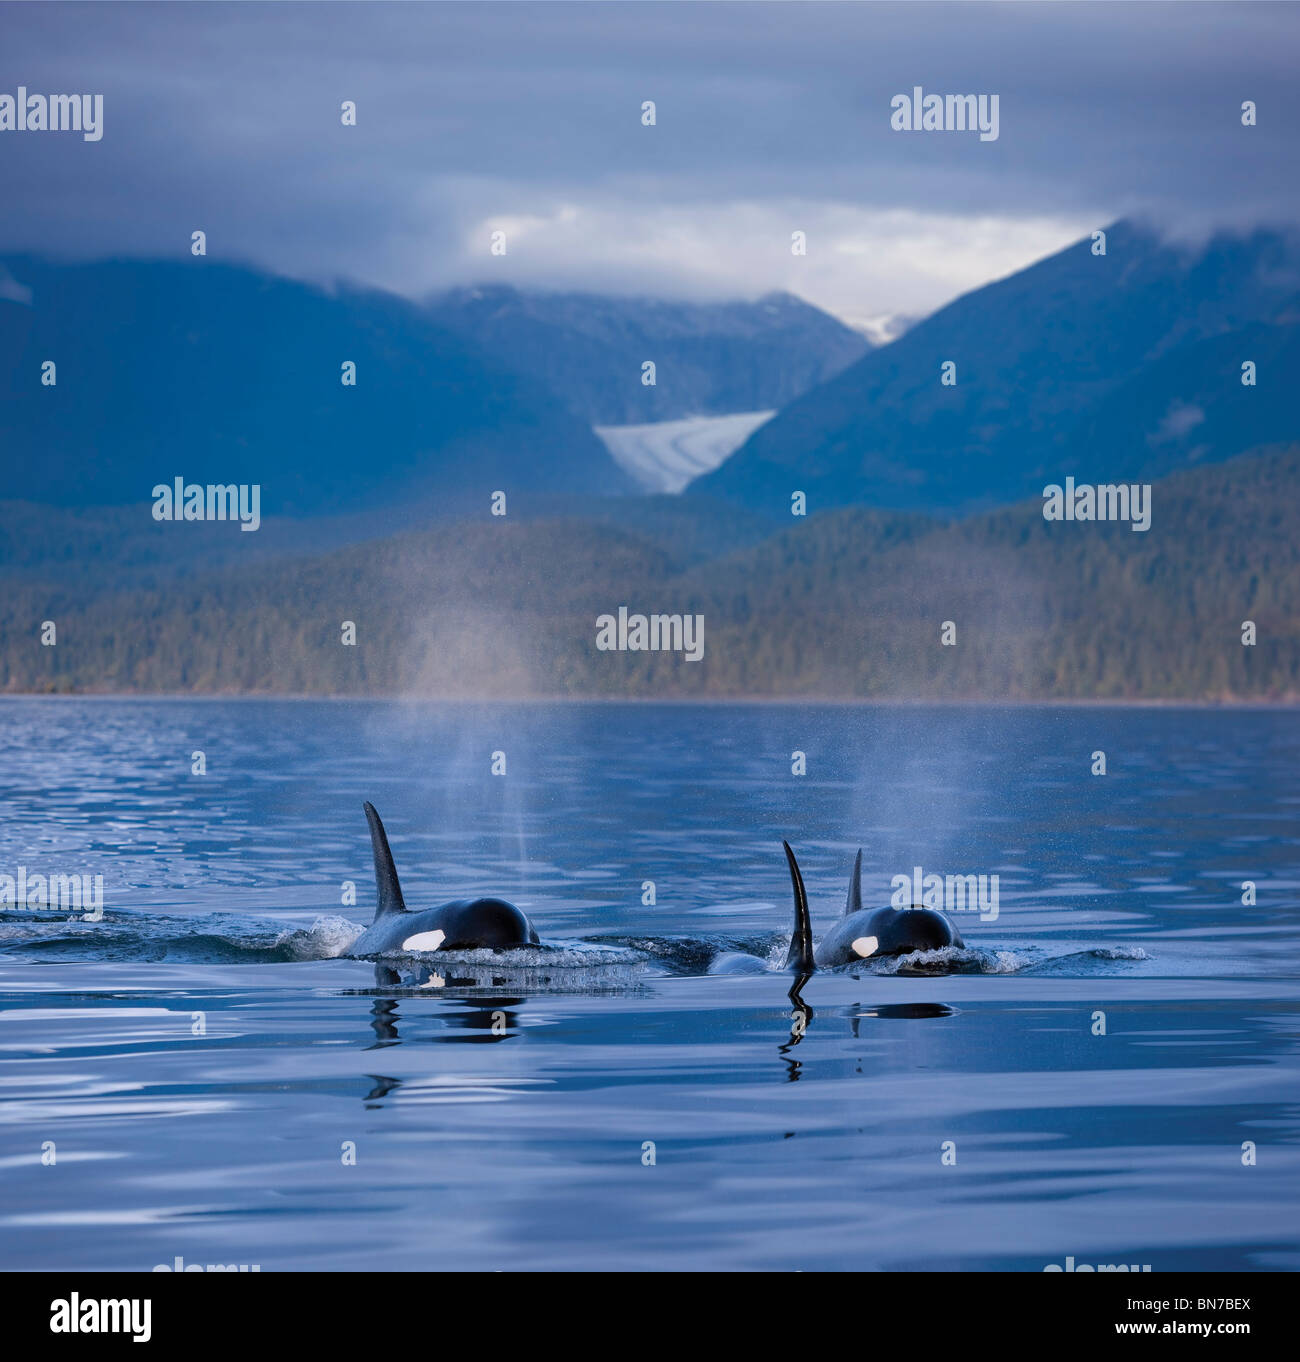 COMPOSITE: Orca Whales surface in Alaska's Inside passage with the Coastal Range and Eagle Glacier in the background, Alaska Stock Photo